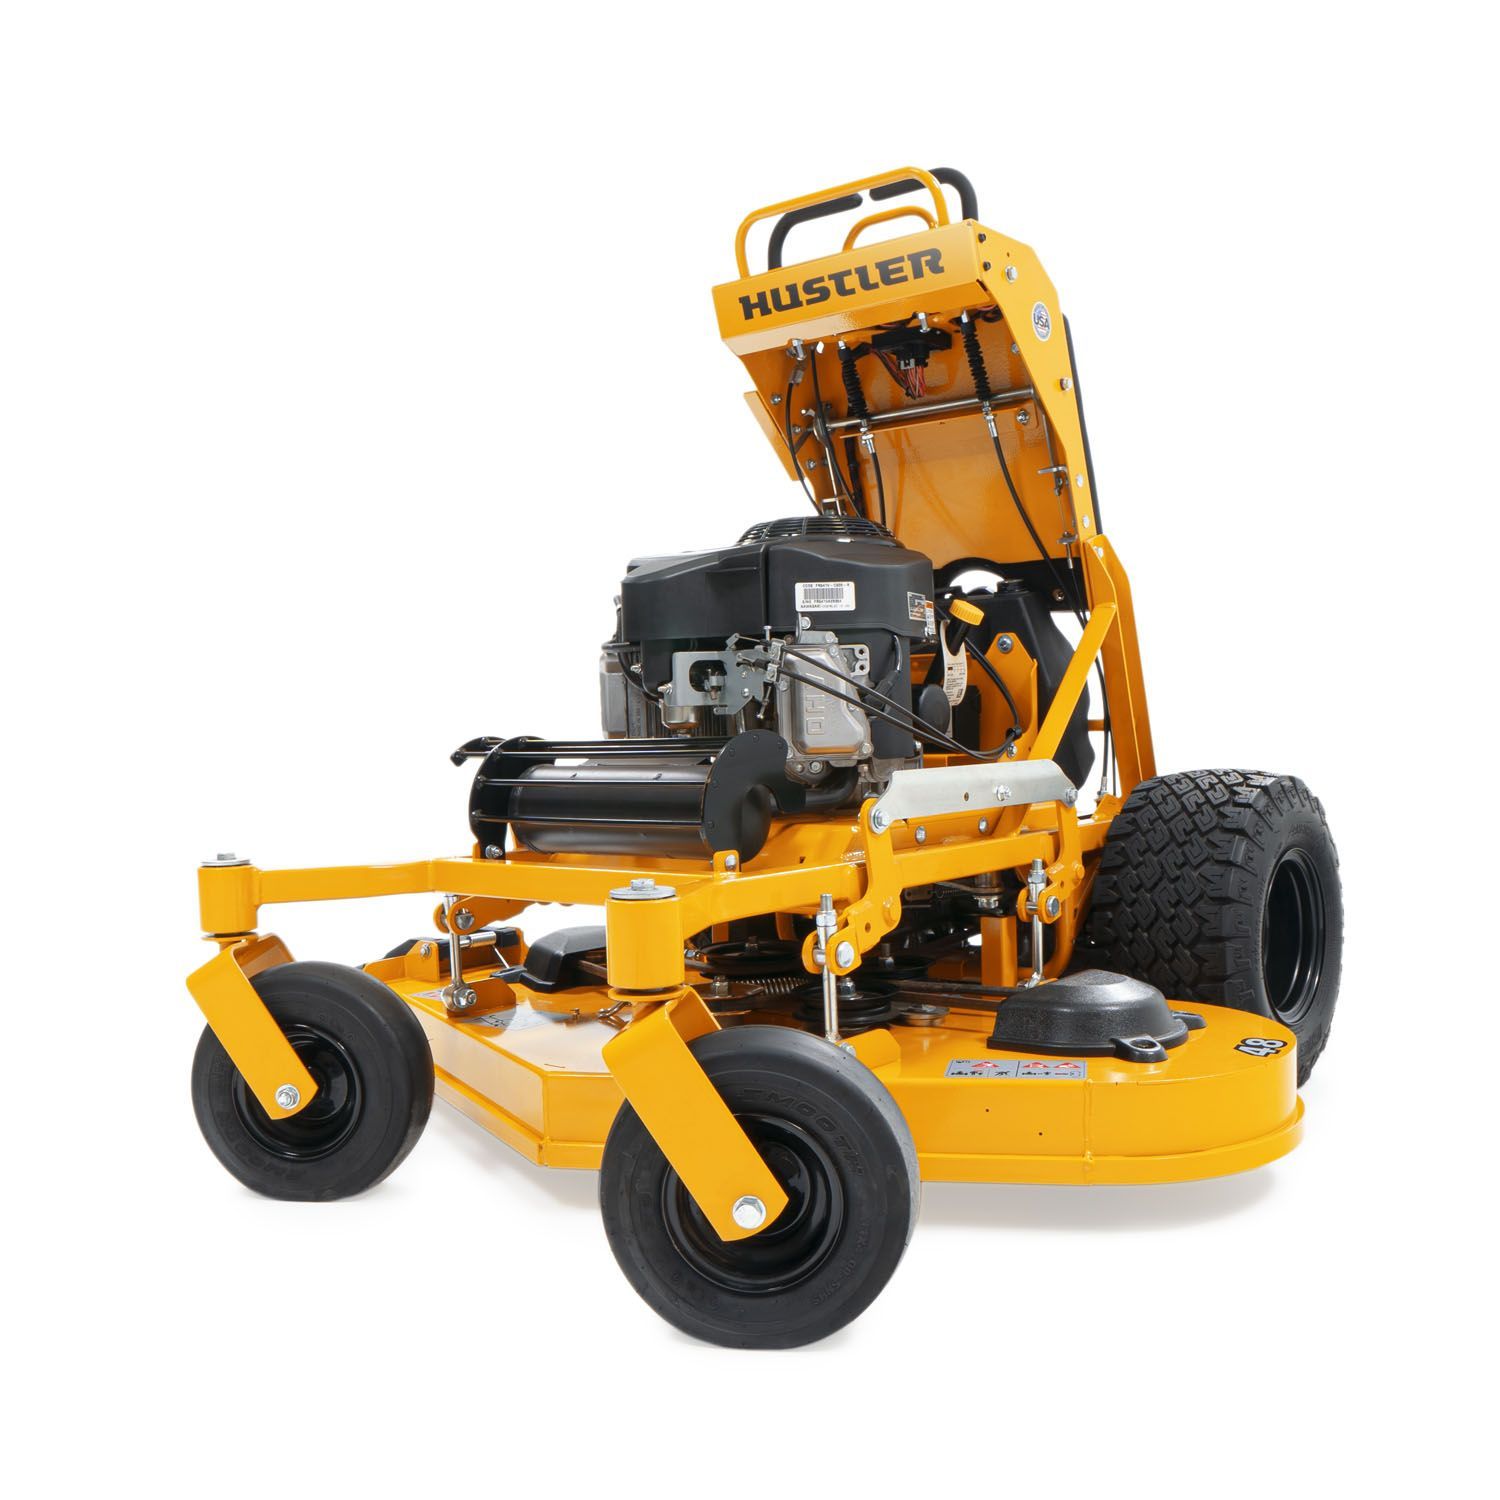 A yellow lawn mower with the hood up on a white background